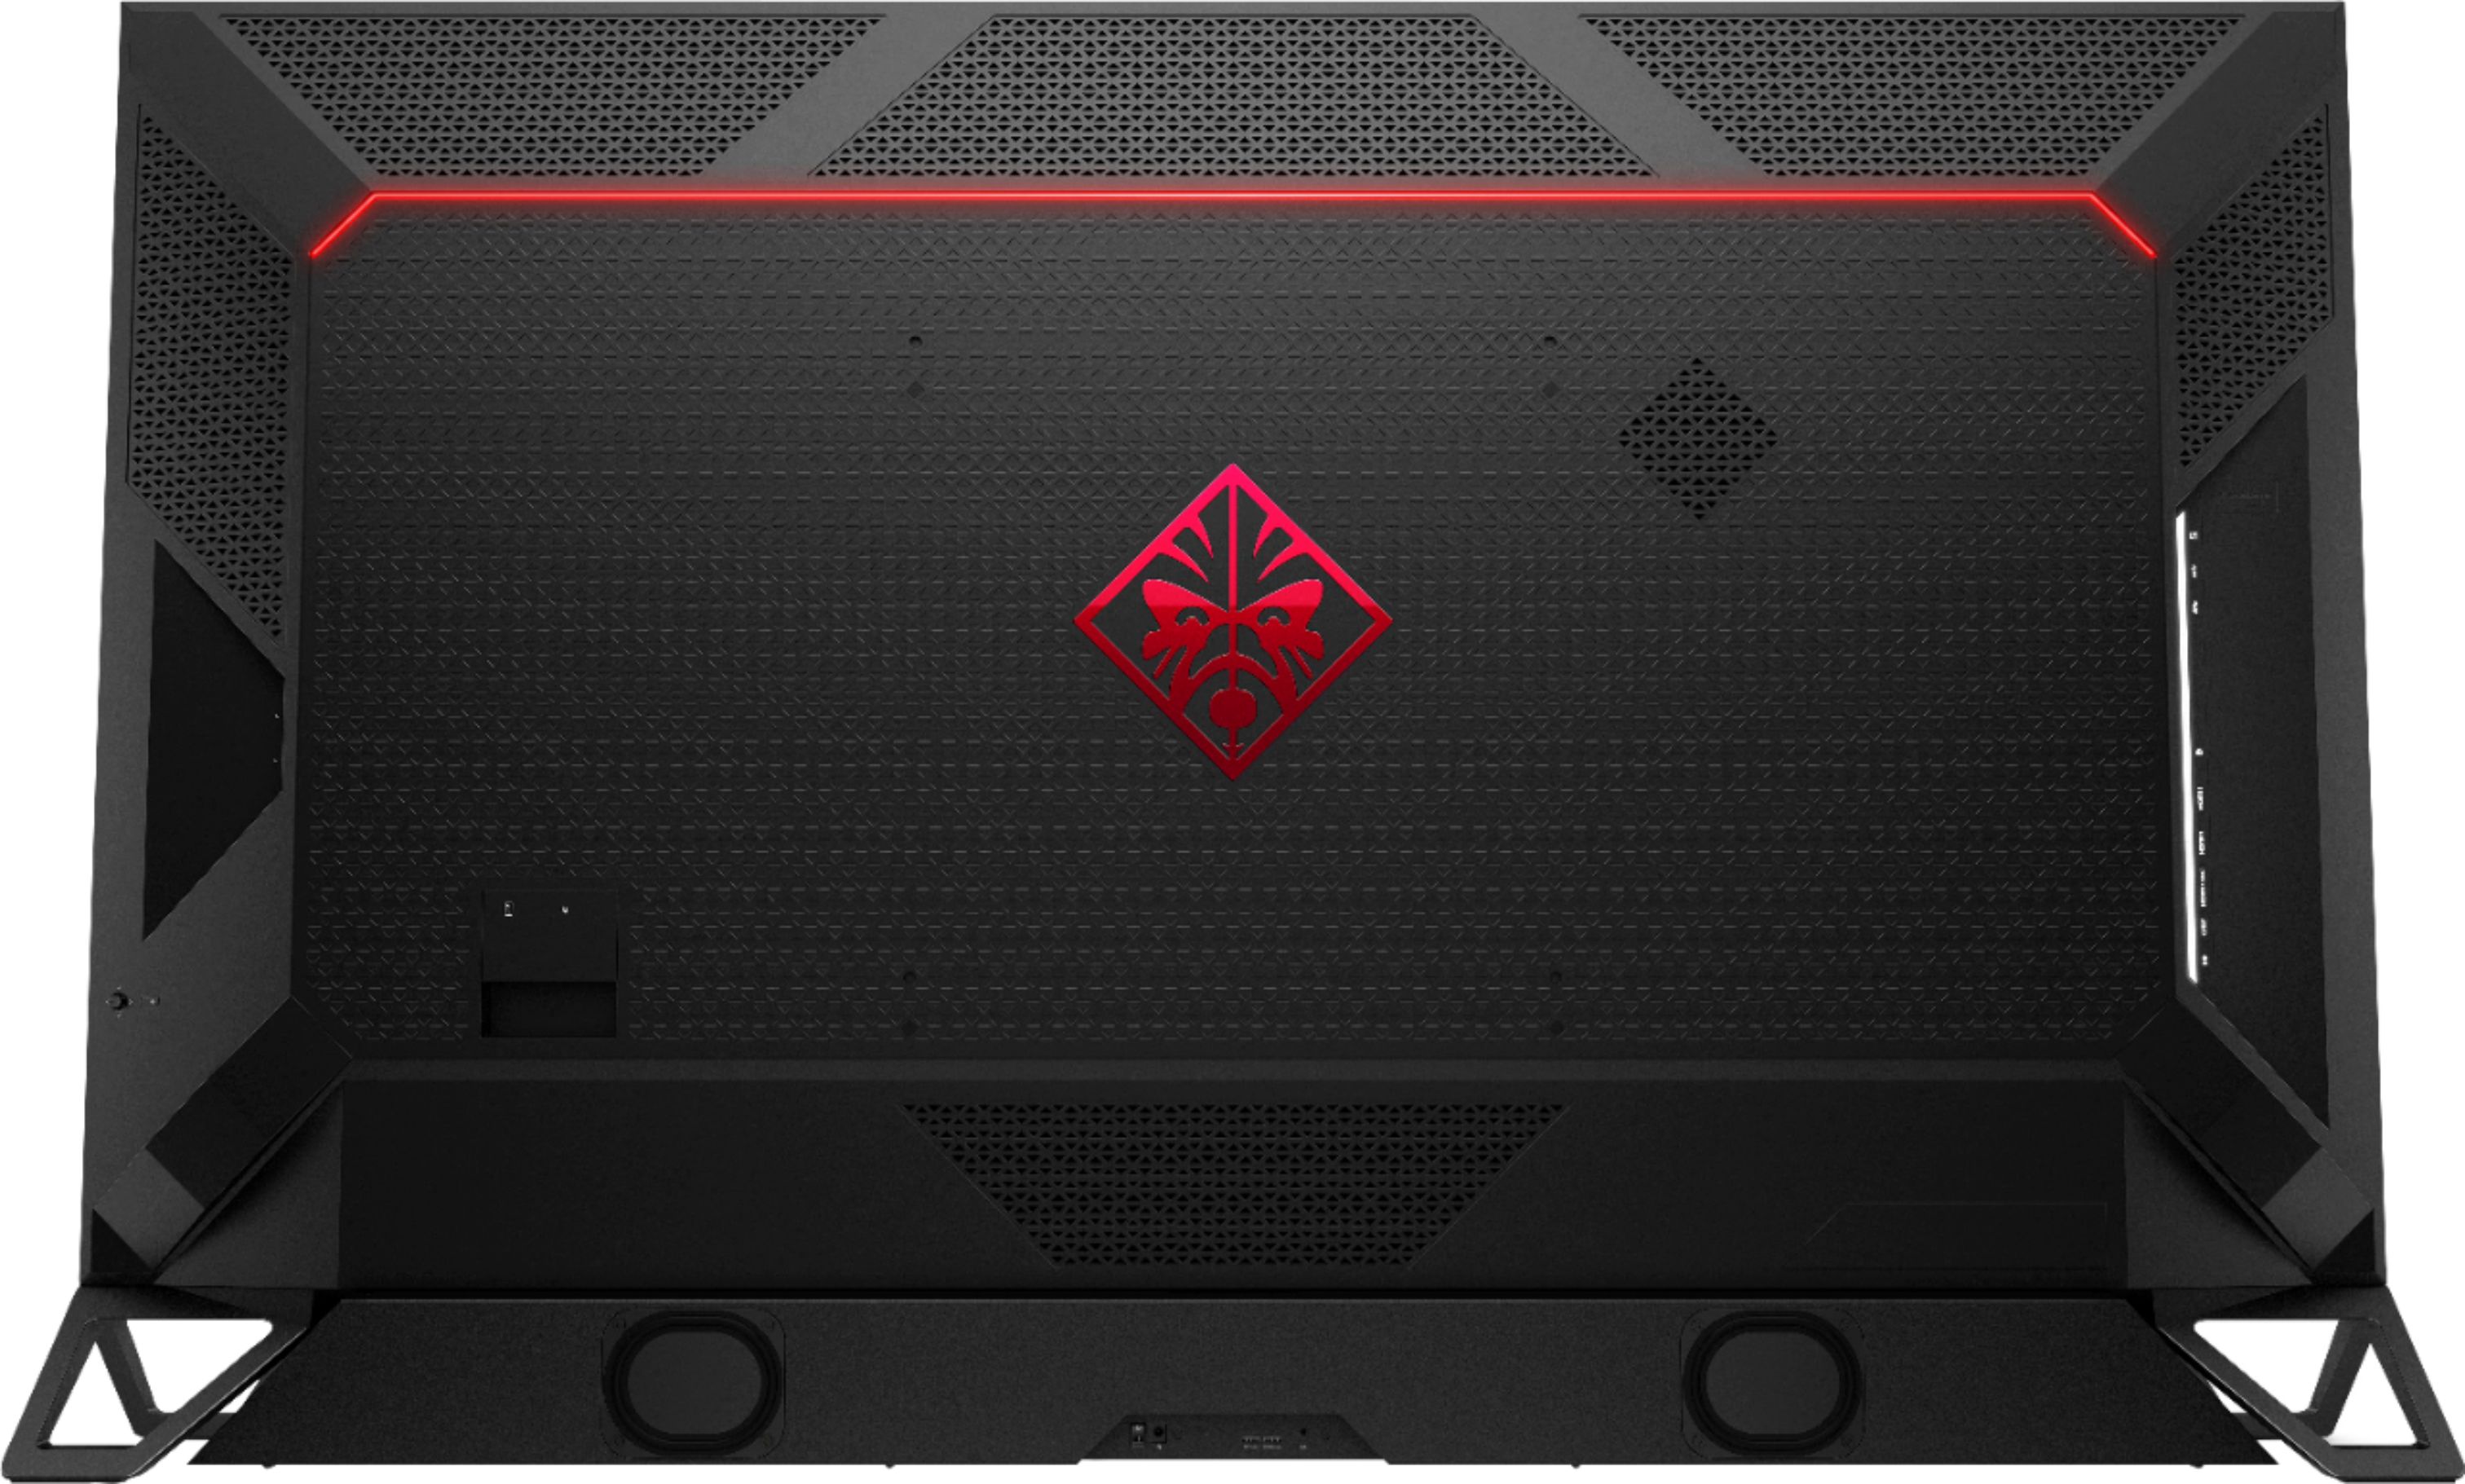 Back View: HP OMEN - Emperium 65" LED 4K UHD G-SYNC Ultimate Monitor with HDR (DisplayPort, HDMI, USB) - Black/Green